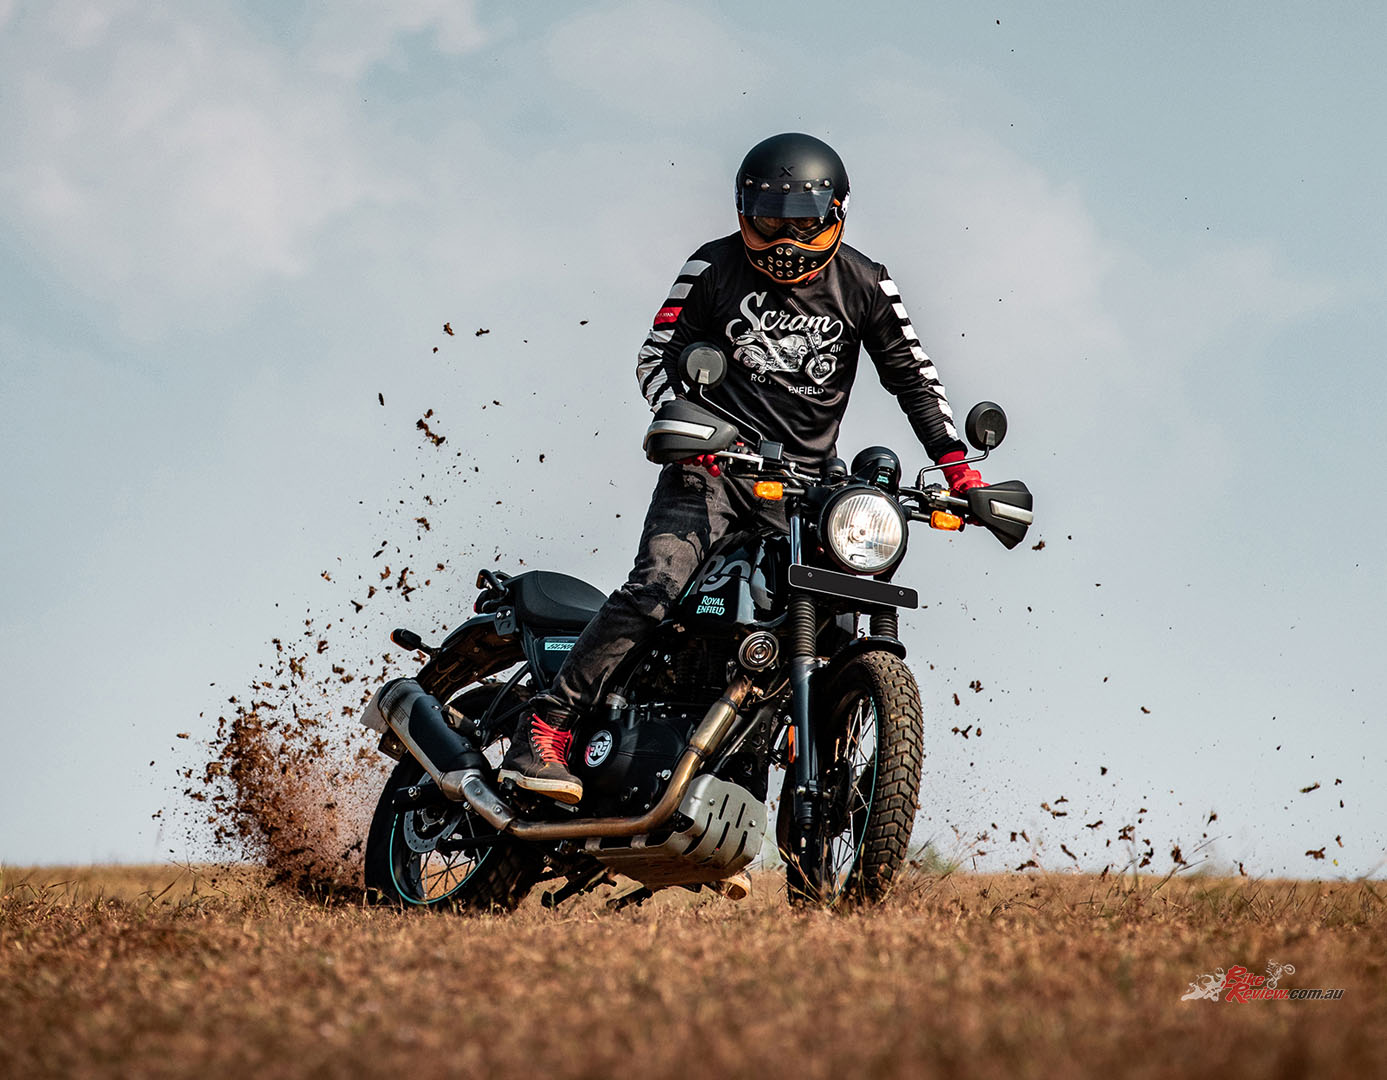 Royal Enfield also say the Scram 411 is a new subspecies that has the aesthetics of a scrambler and comes with built-in strong adventure DNA.